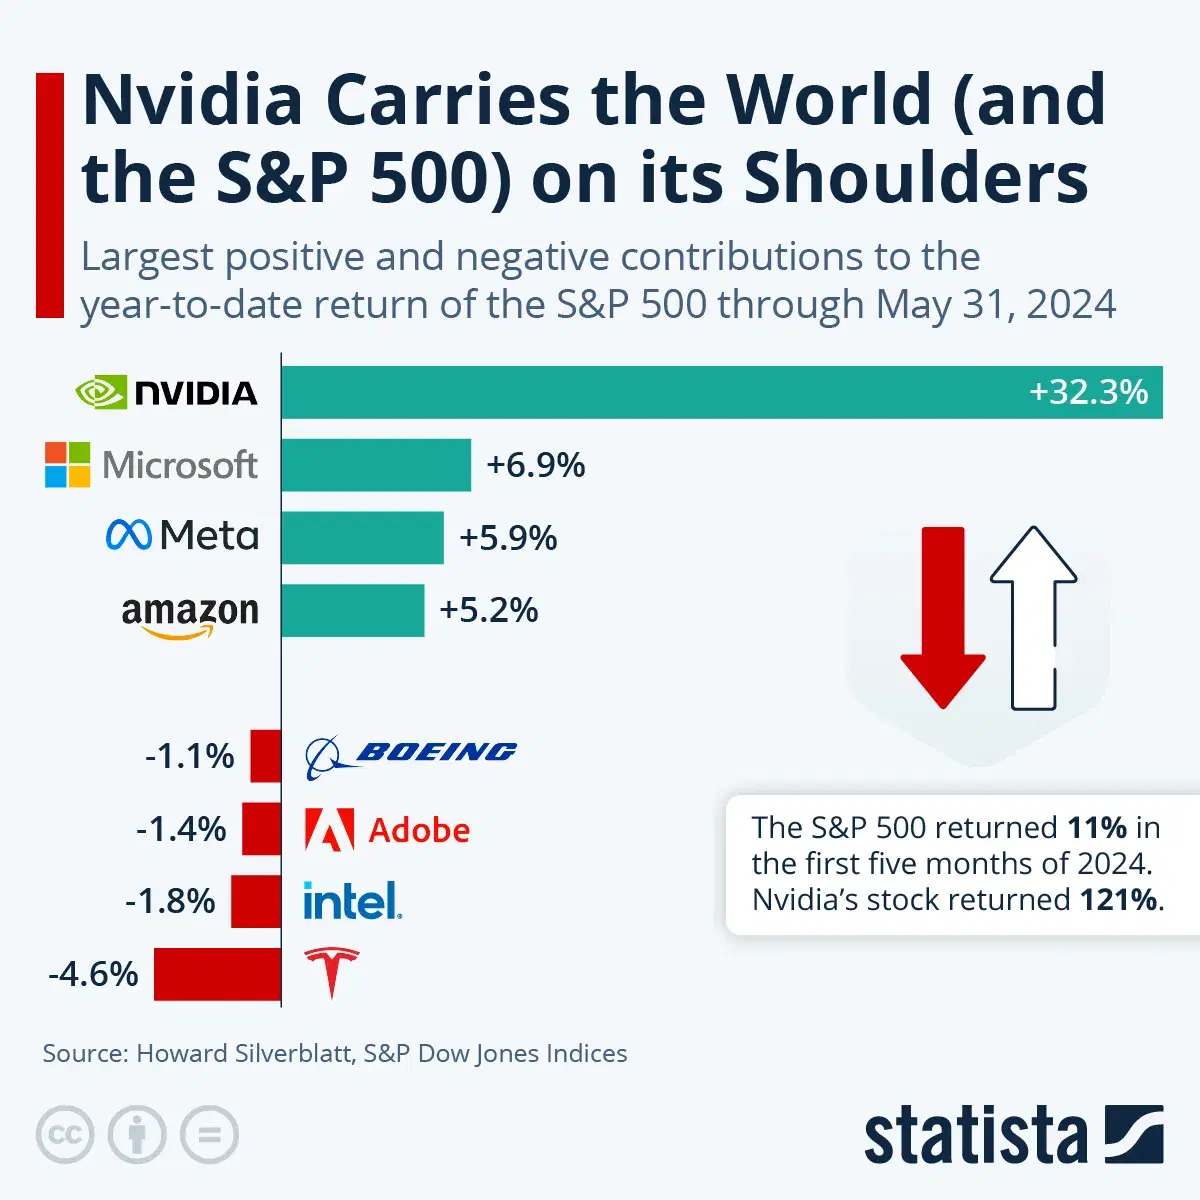 Nvidia Carries the World (and the S&P 500) on its Shoulders